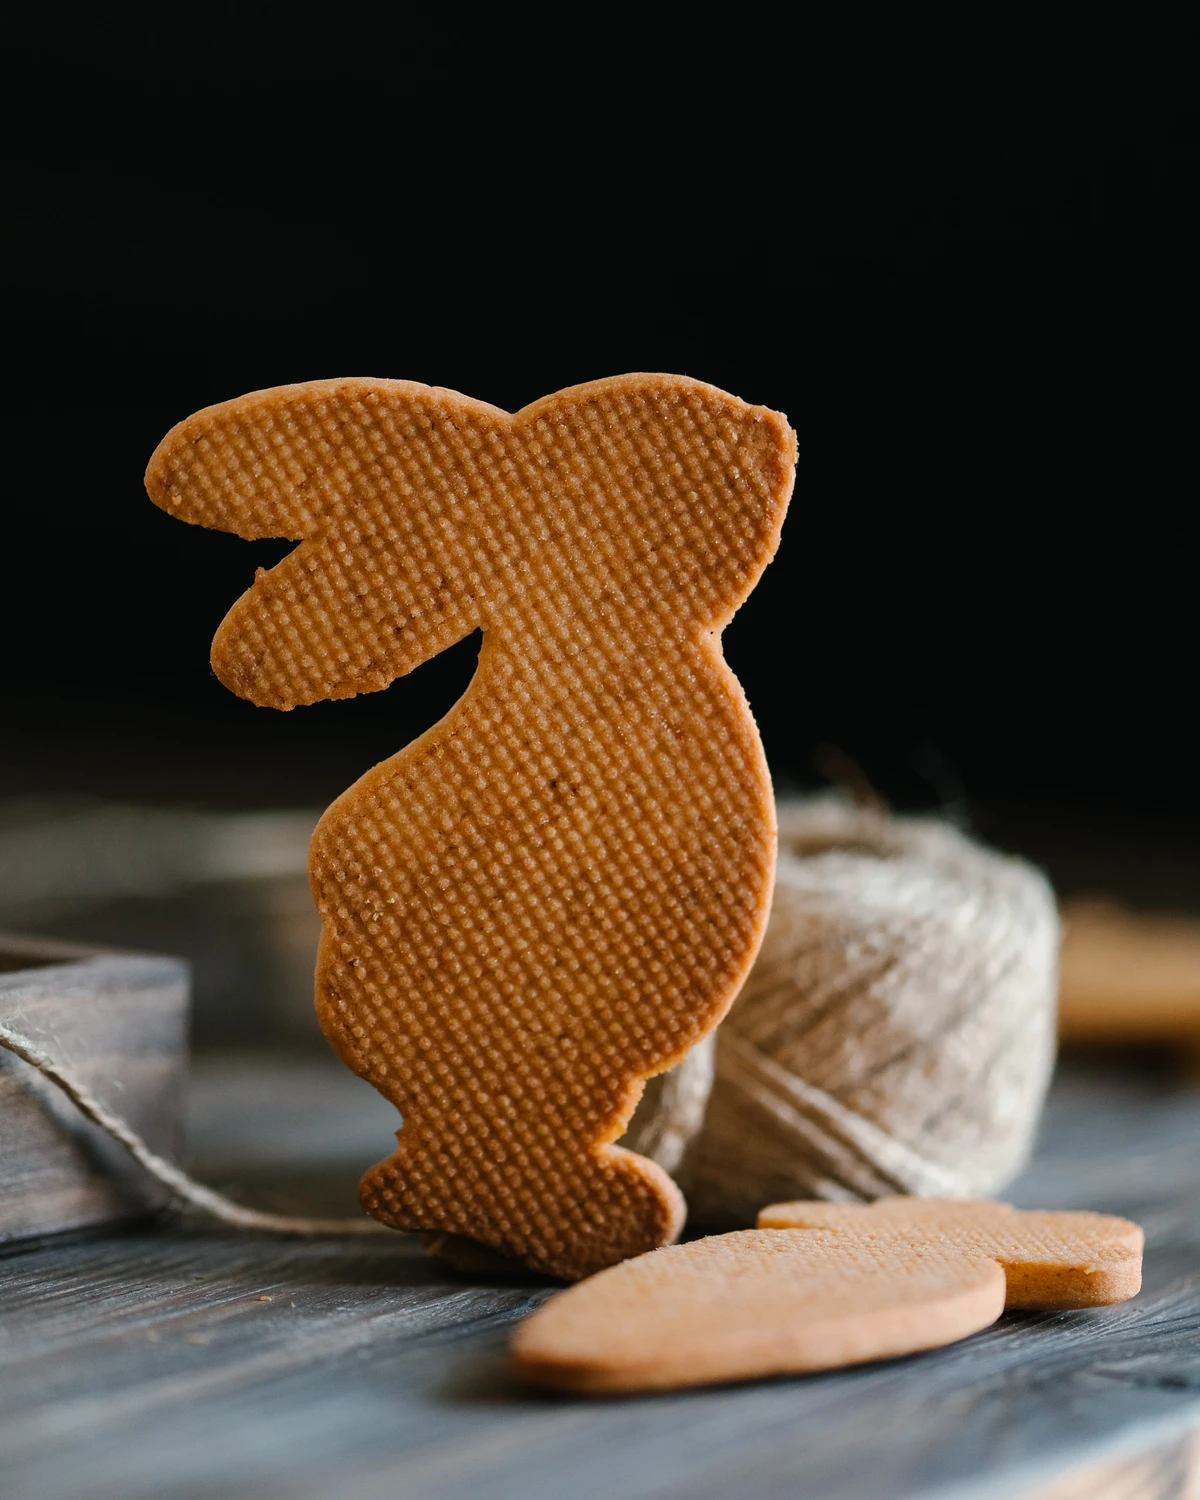 Shortbread in the shape of a hare. A shortbread cookie in the shape of a hare stands on a wooden table. Behind is a roll of thread.